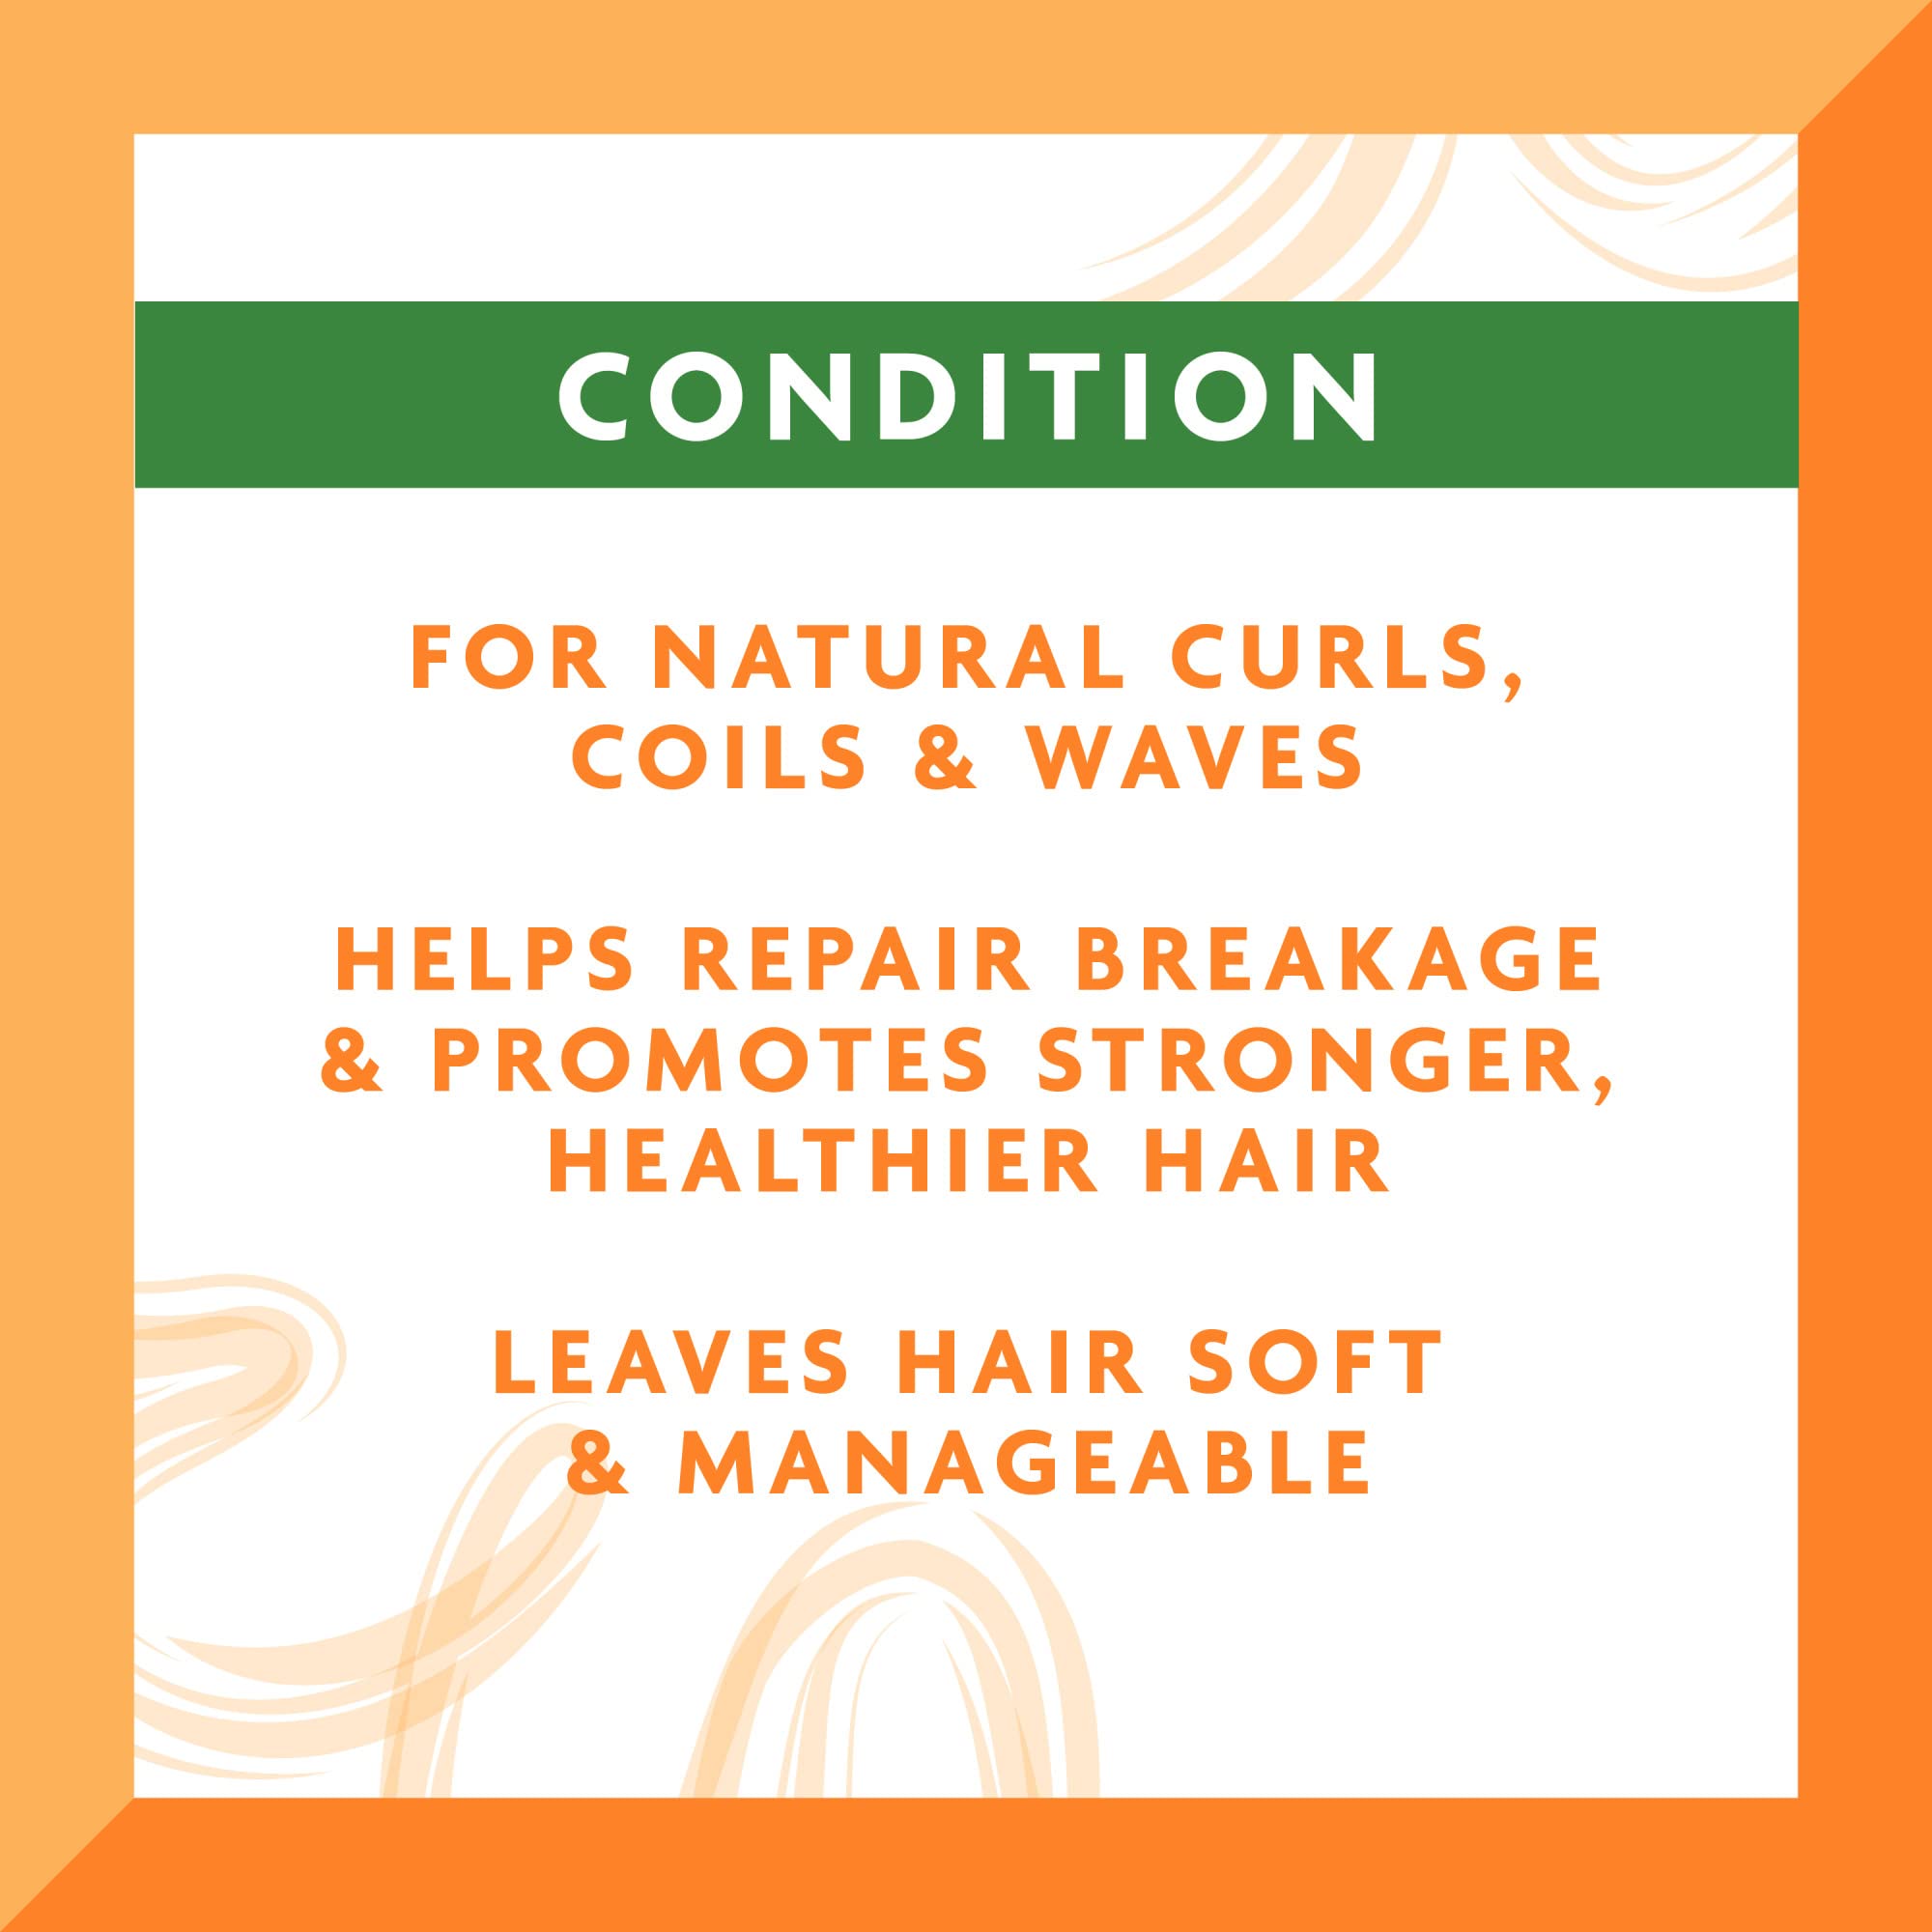 Cantu Leave-In Conditioning Cream for Natural Hair with Pure Shea Butter, 12 oz (Pack of 2) (Packaging May Vary)